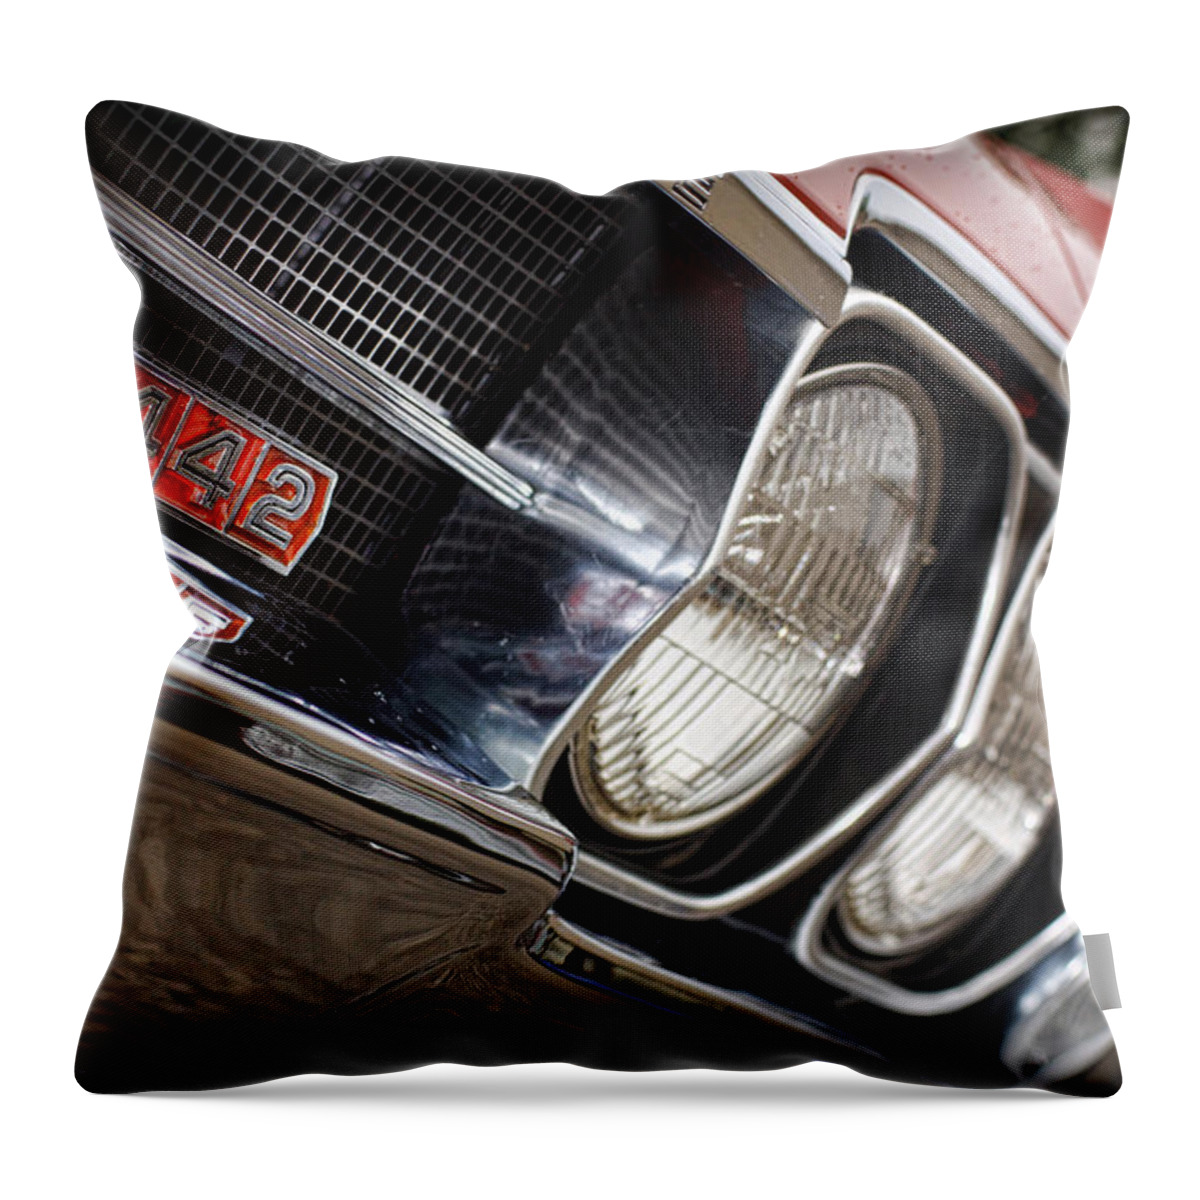 Red Throw Pillow featuring the photograph Red 1966 Olds 442 by Gordon Dean II